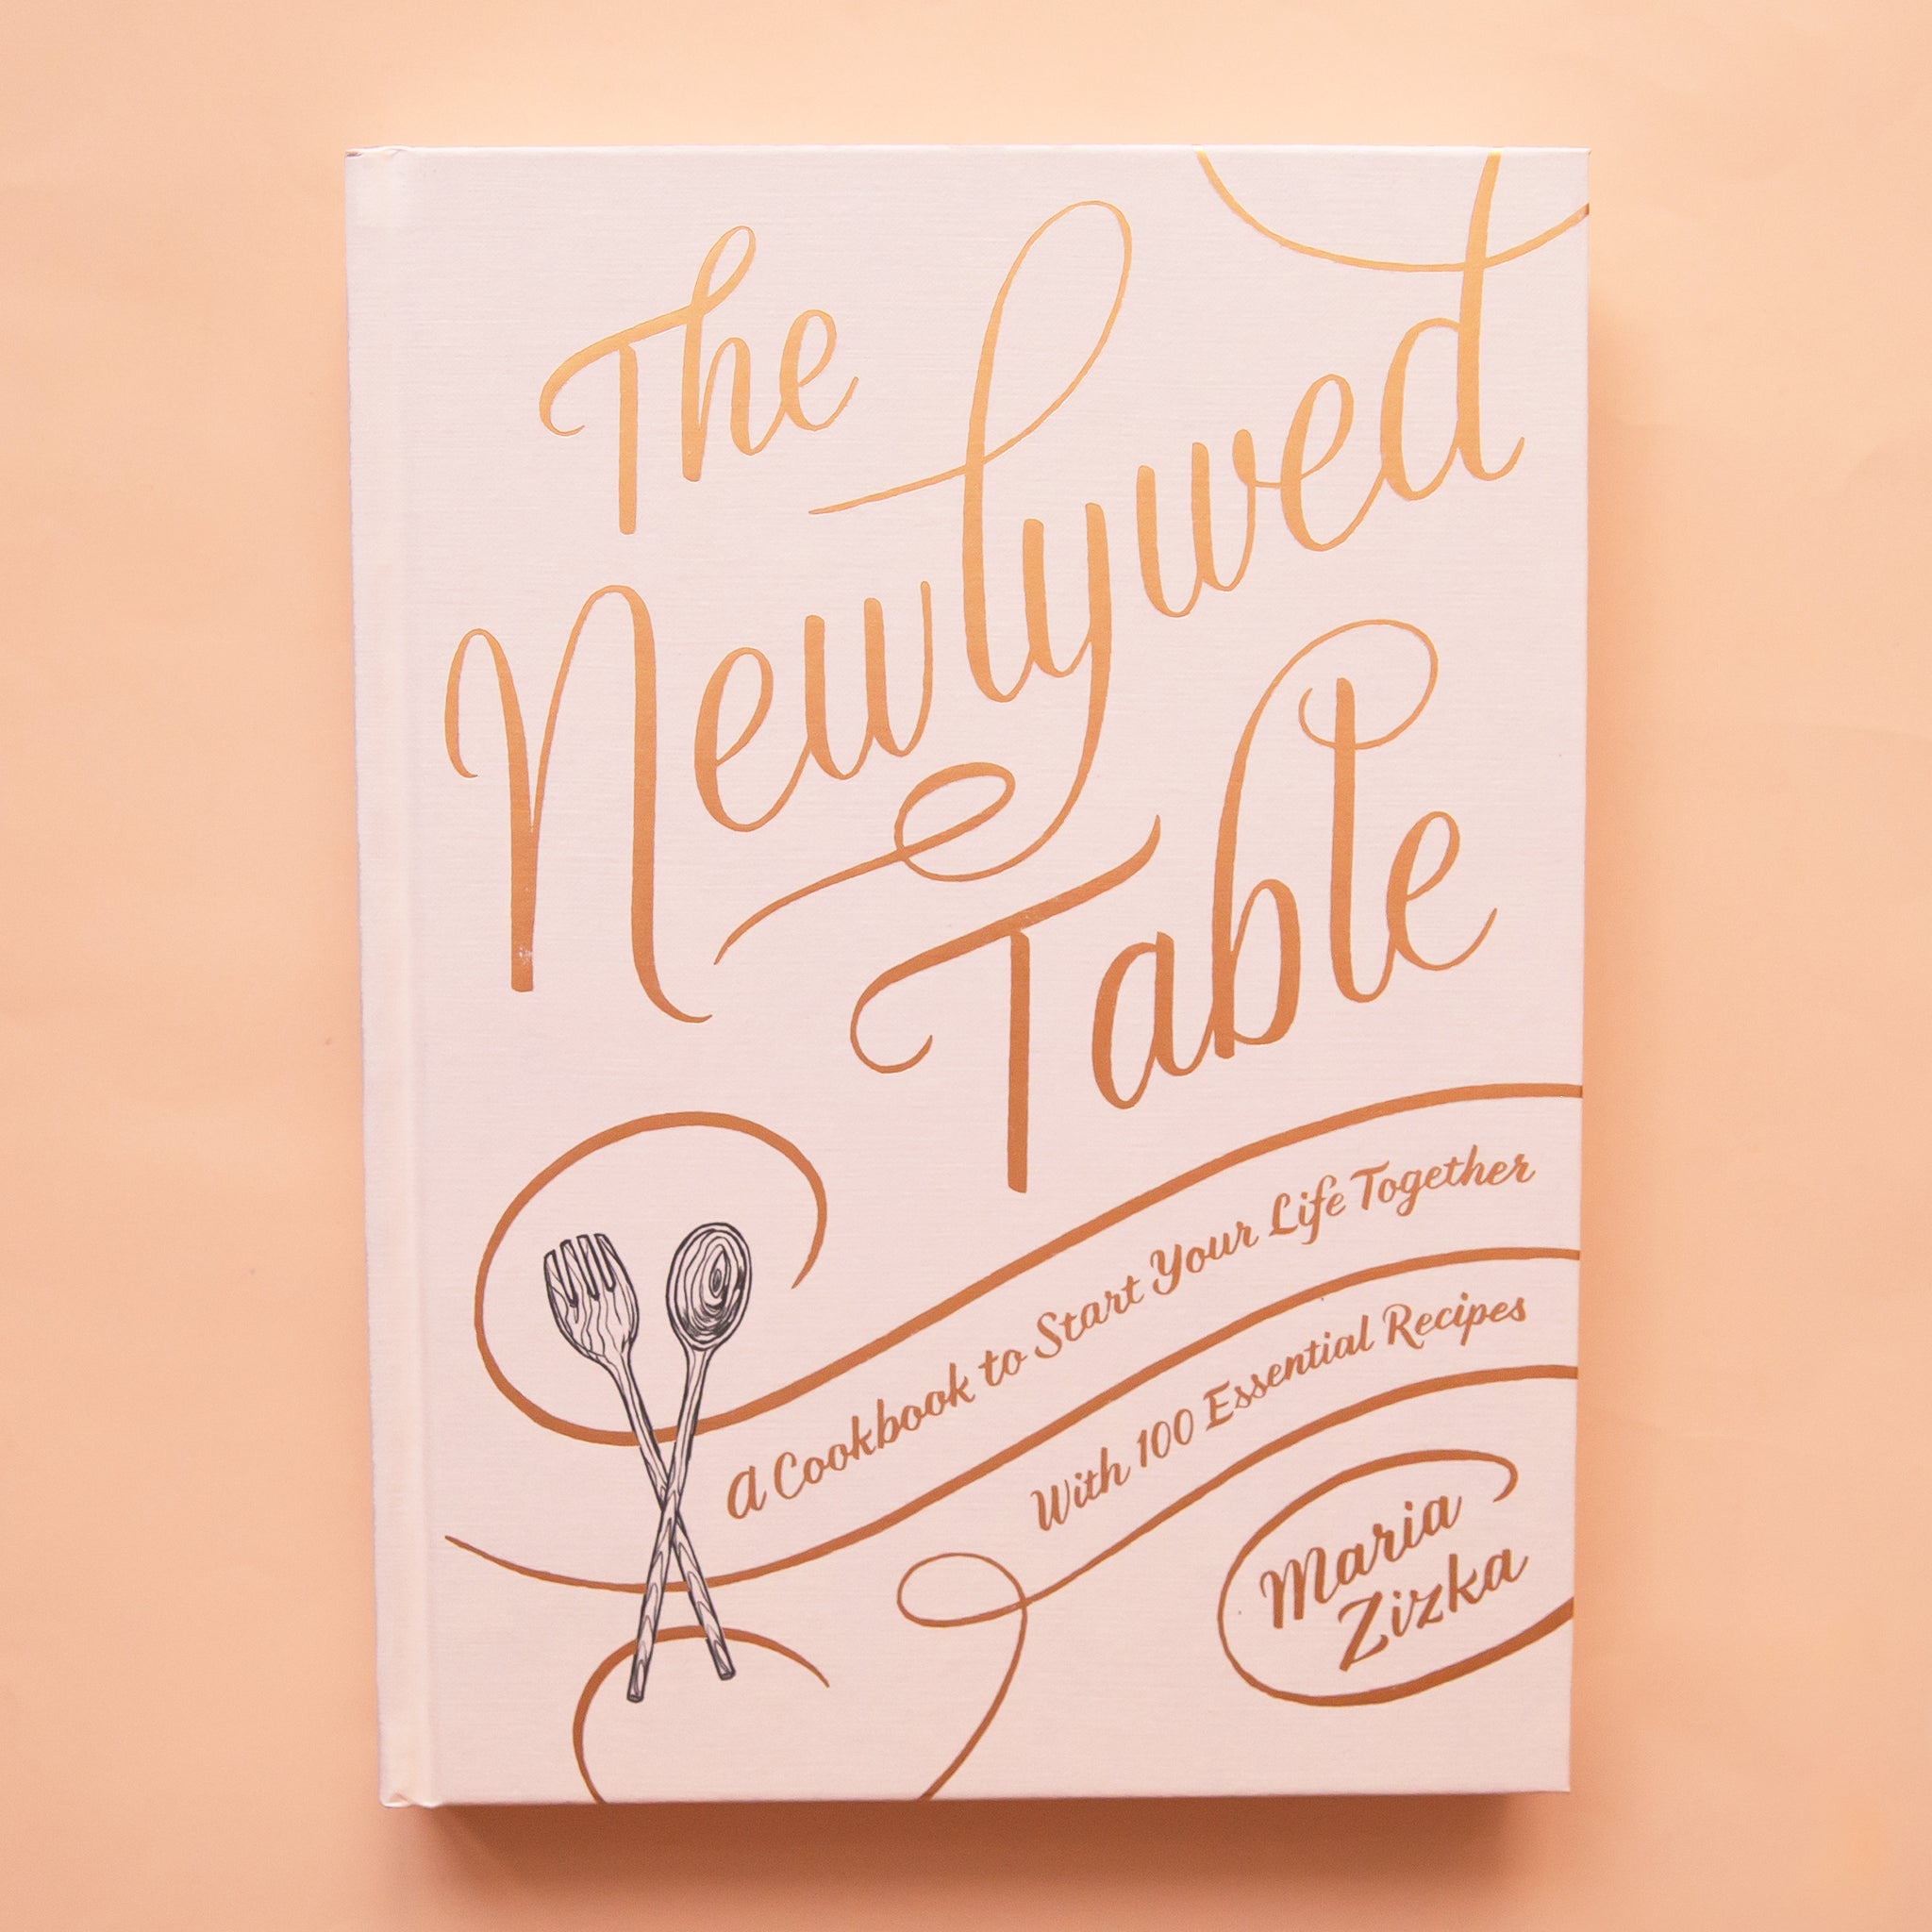 White hardcover book titled 'The newlywed table' in gold foil cursive lettering. Below reads 'a cookbook to start your life together with 100 essential recipes'. A black and white wooden spork and spoon sits in the bottom left corner.